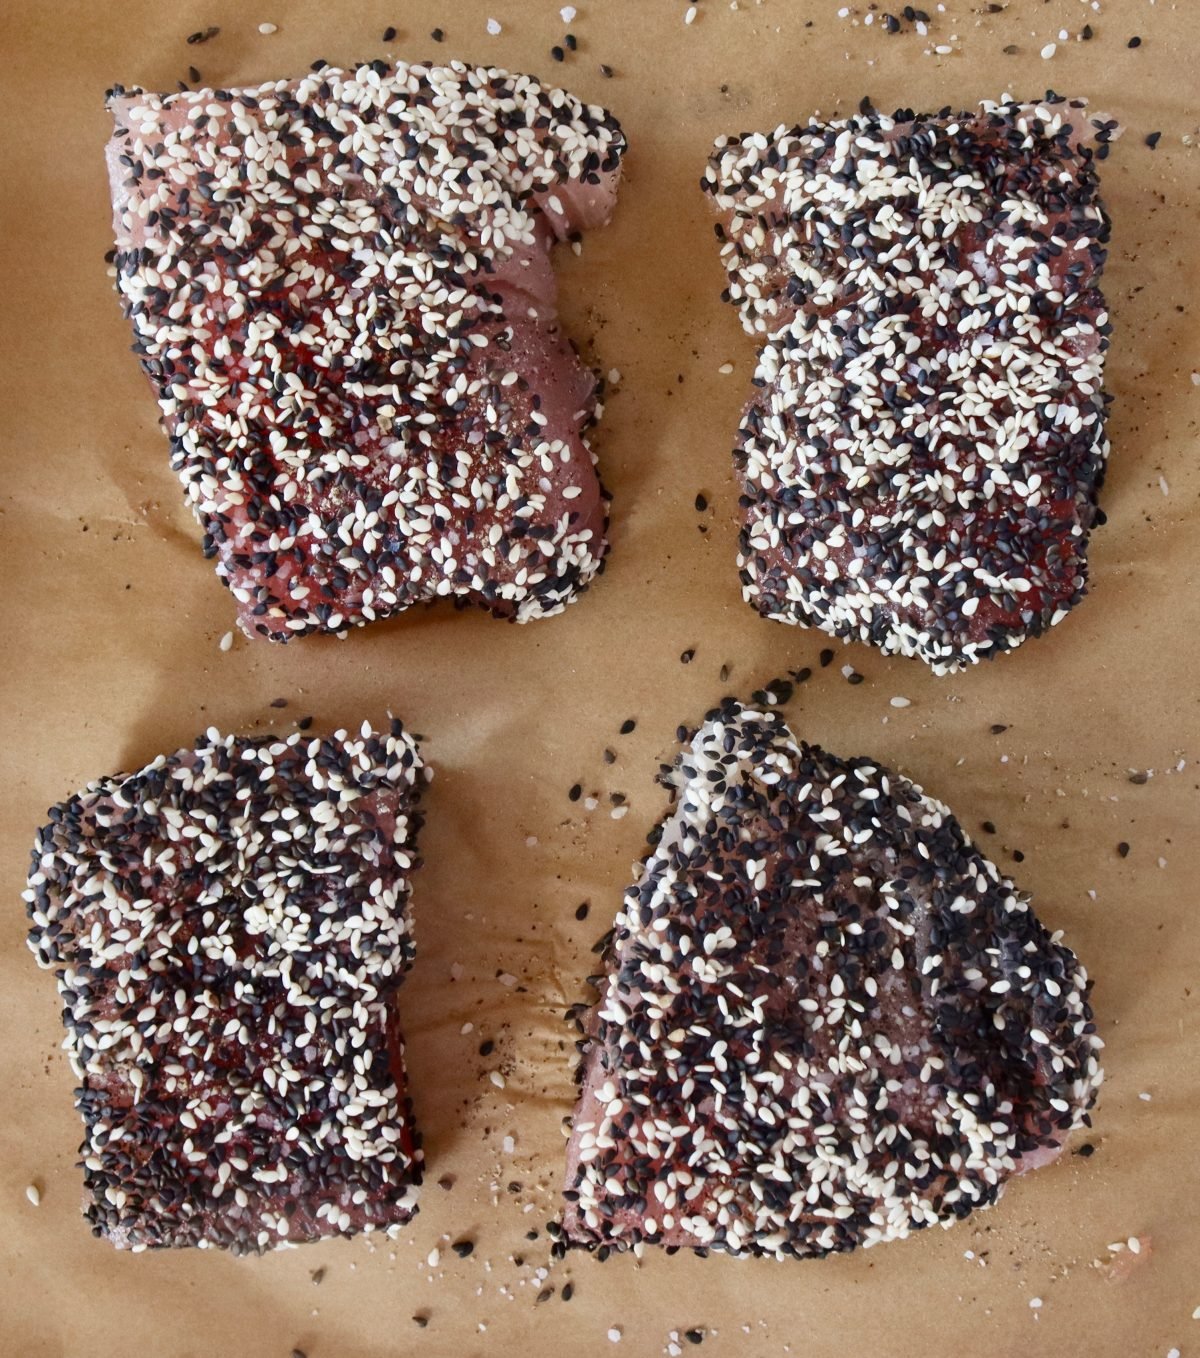 4 ahi tuna steaks with black and white sesame seeds on both sides.